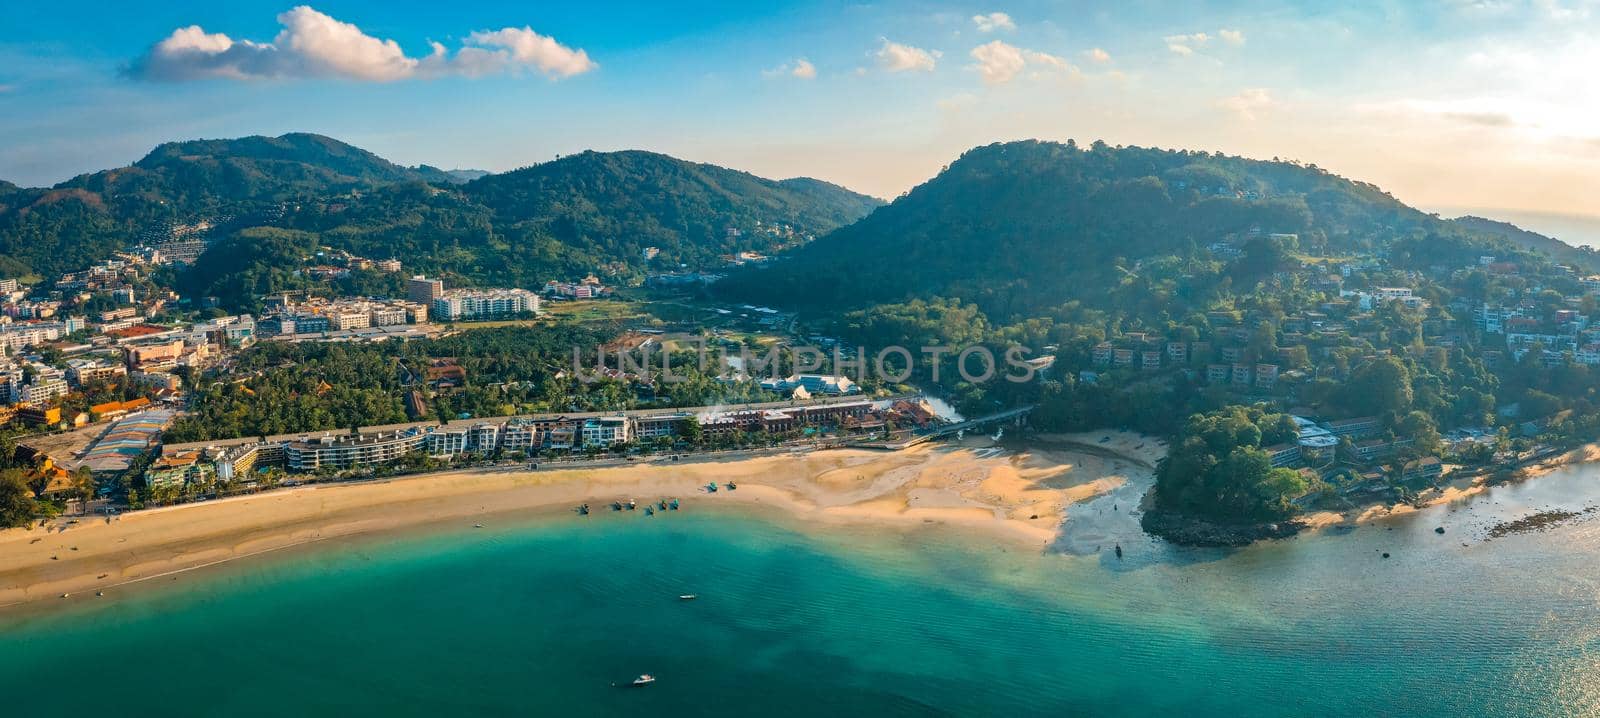 Aerial view in Patong beach in Phuket Province, Thailand by worldpitou